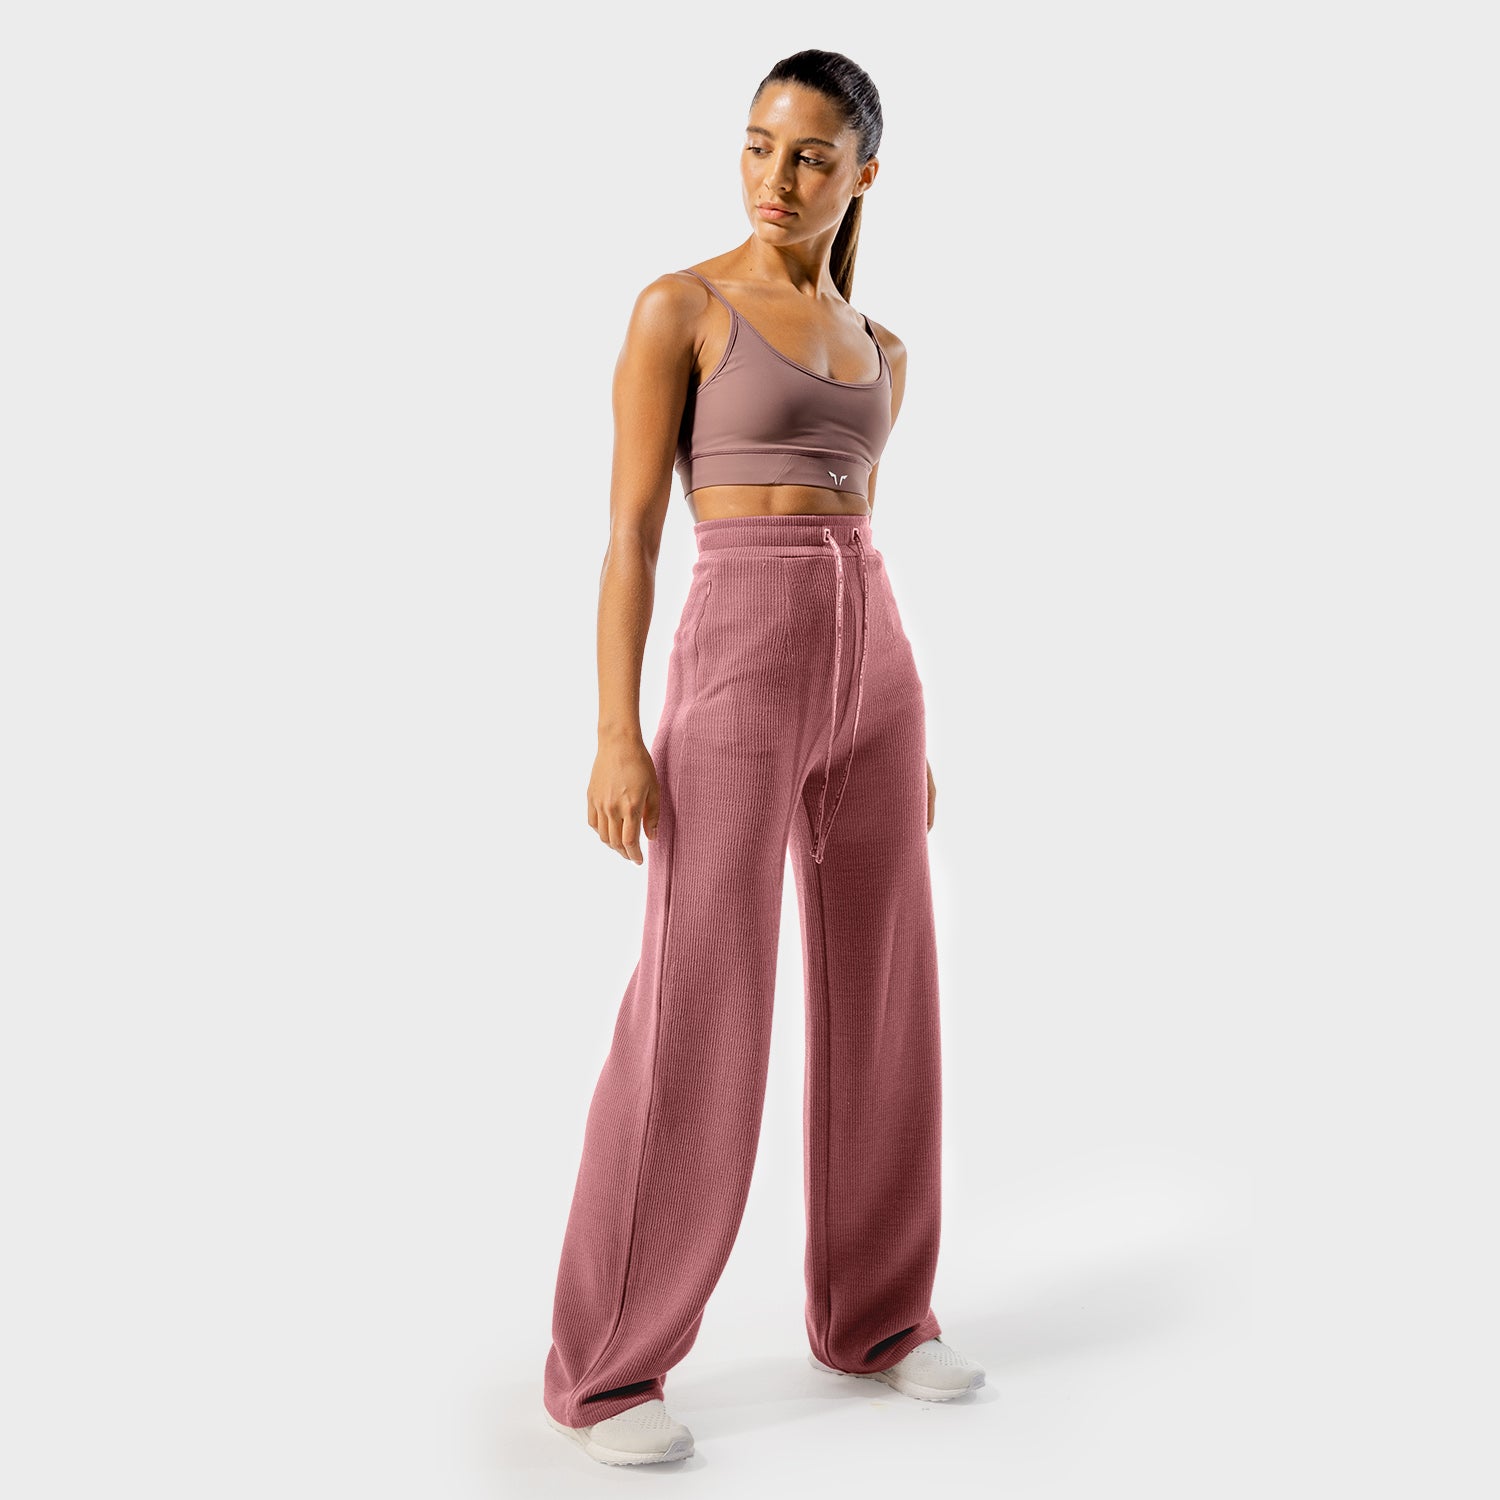 squatwolf-gym-pants-for-women-luxe-wide-leg-pants-baby-pink-workout-clothes